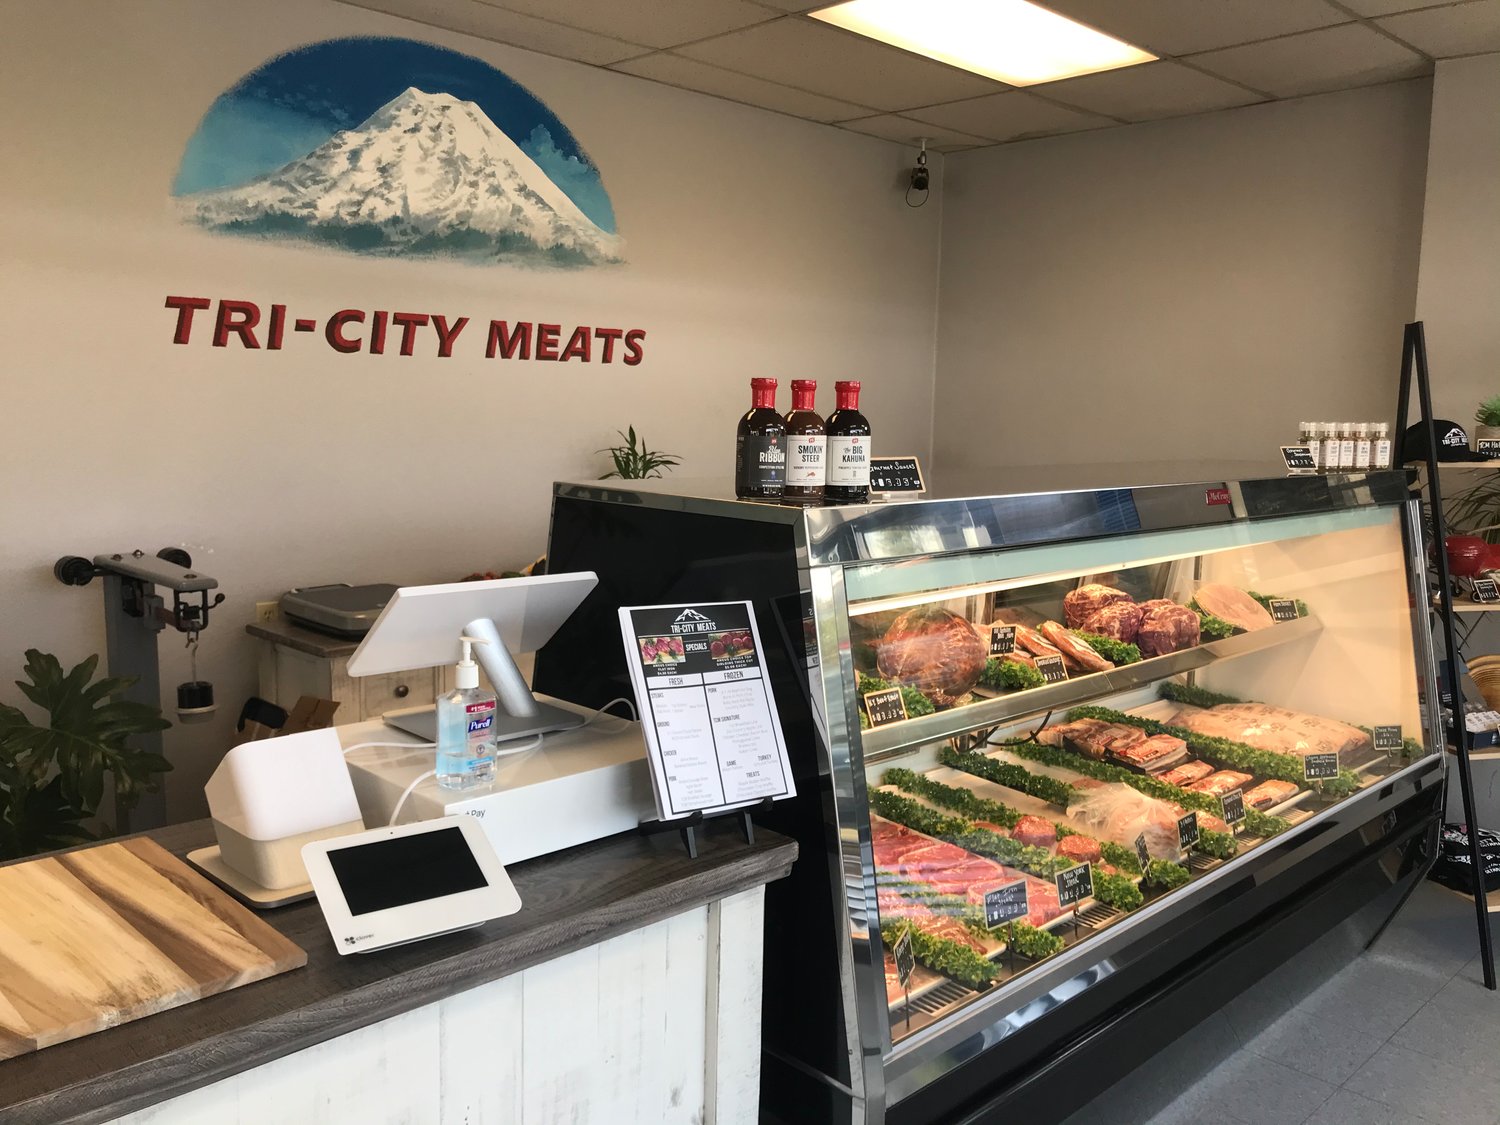 The meat counter at Tri-City Meats.